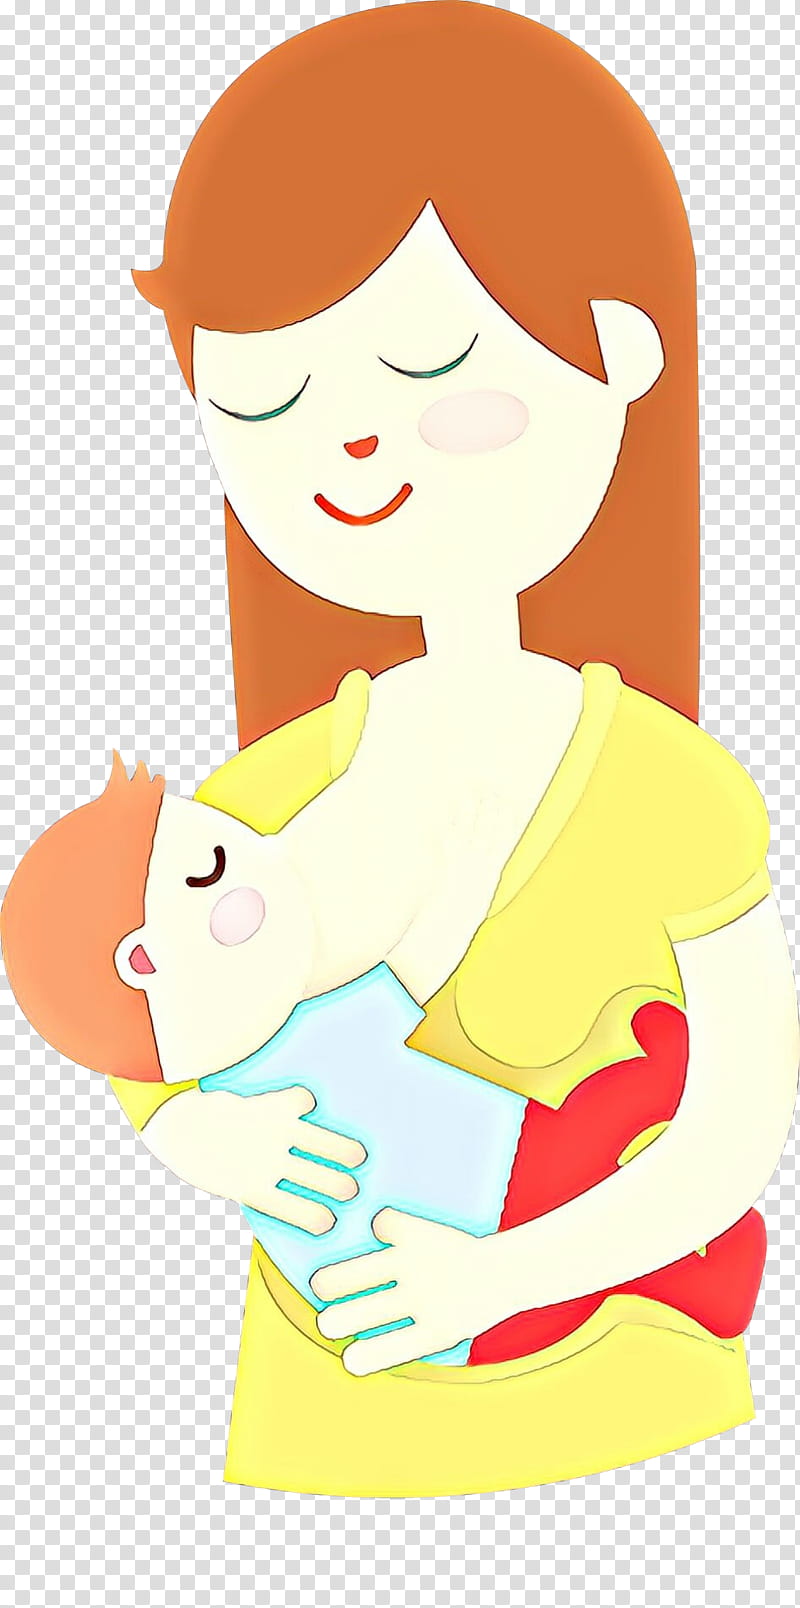 Child, Weaning, Video, Lactation, Woman, Mother, Visual Perception, Son transparent background PNG clipart